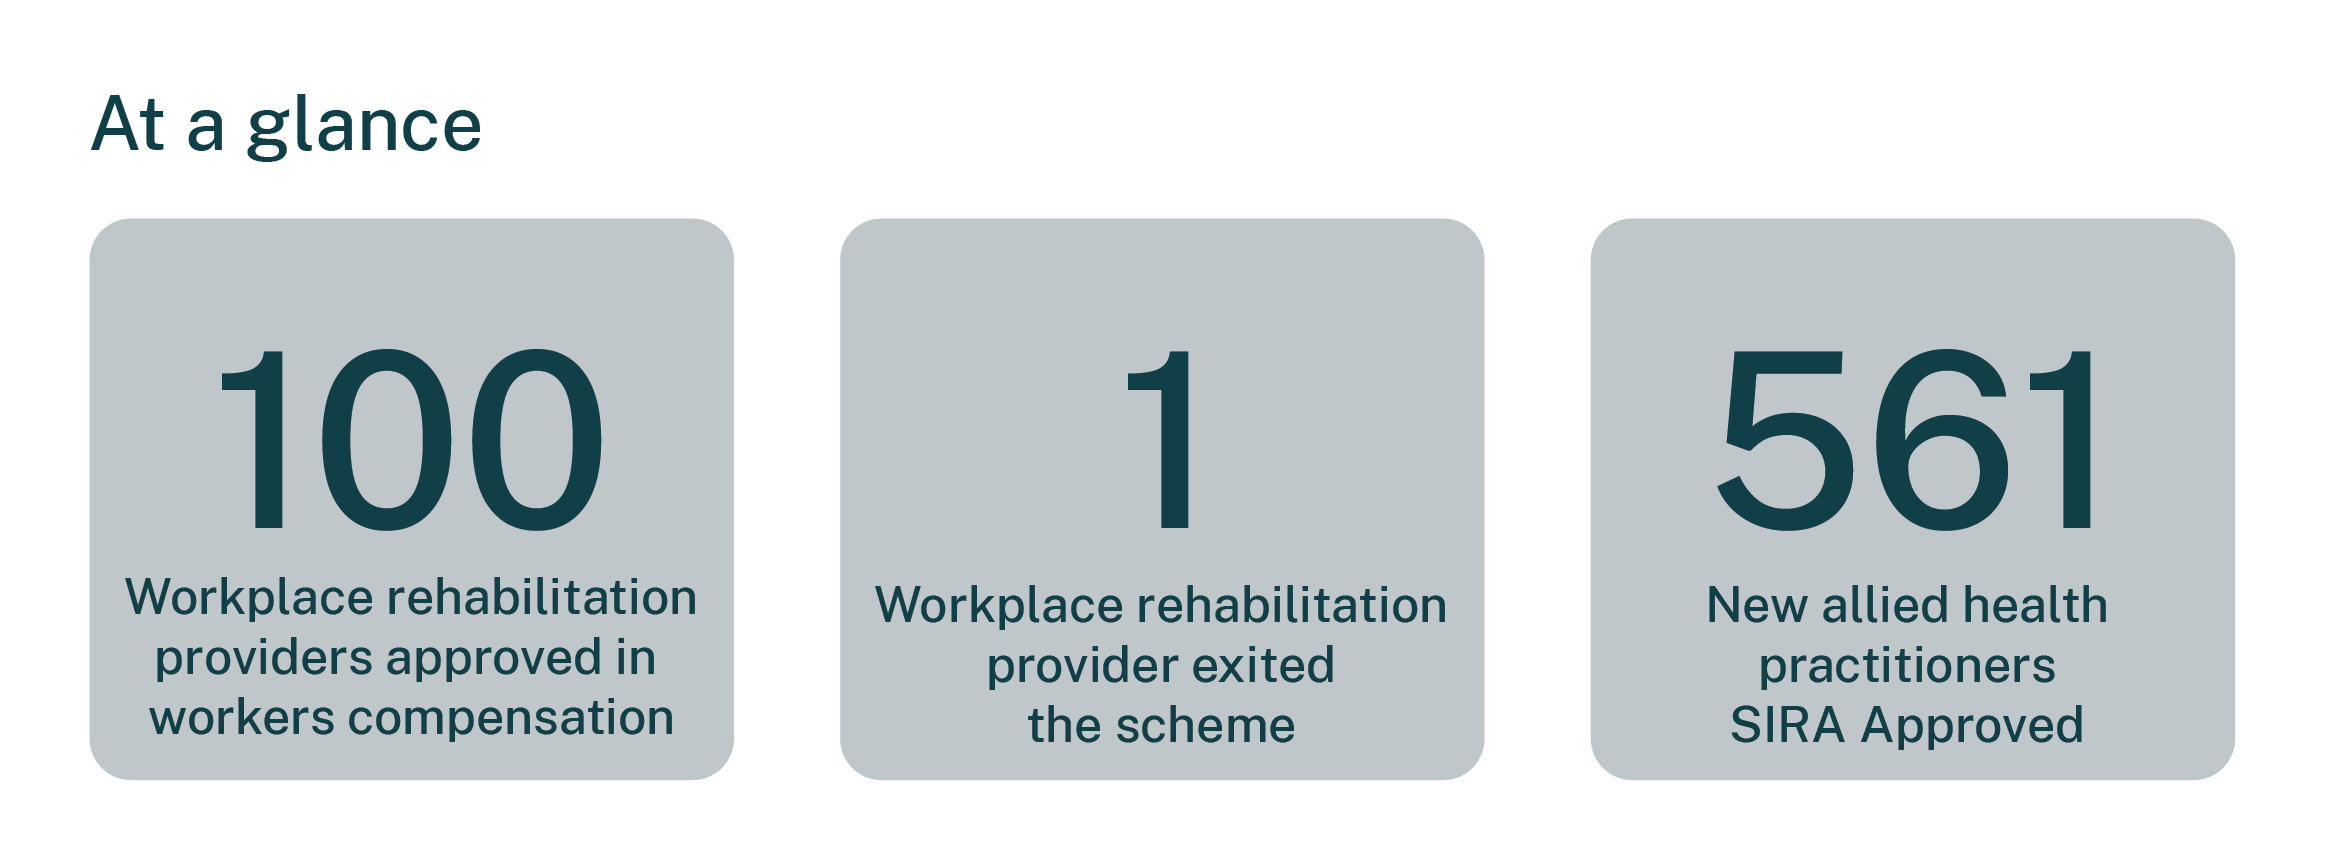 At a glance, 100 workplace rehabilitation providers were approved in workers compensation, 1 workplace rehabilitation provider exited the scheme and 561 new allied health practitioners were approved by SIRA